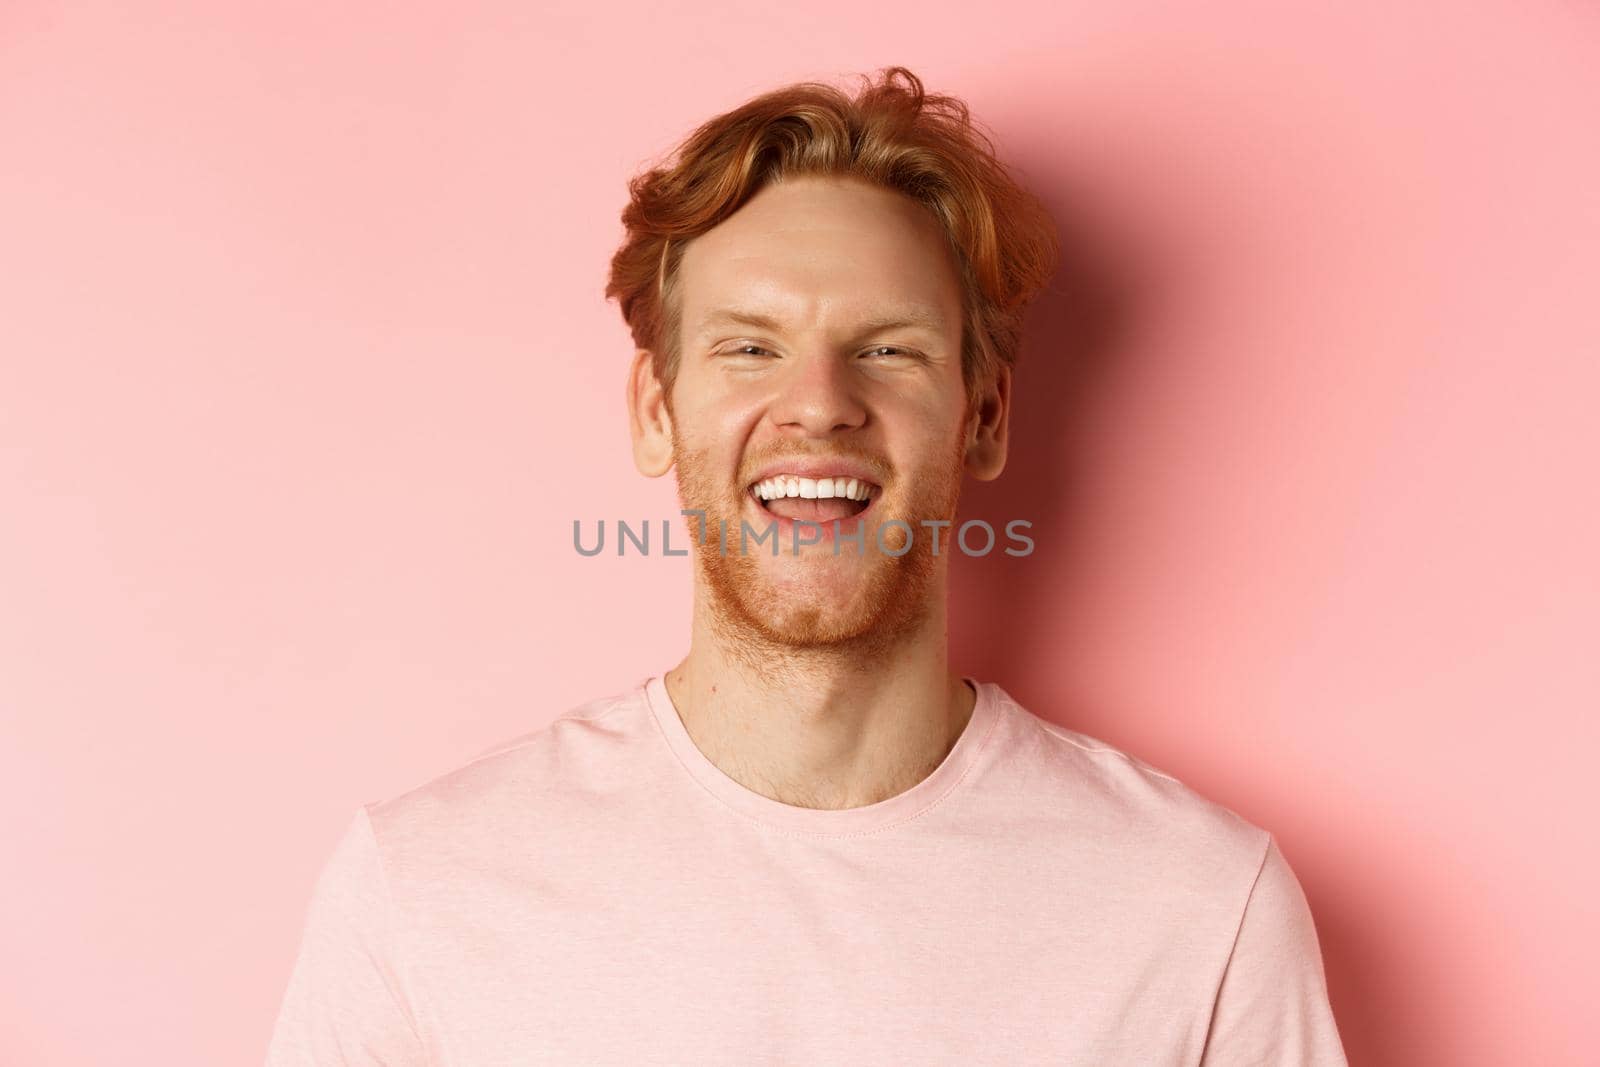 Close up of cheerful young man with messy red hair and beard, laughing and smiling, showing white teeth, looking happy at camera, standing over pink background.